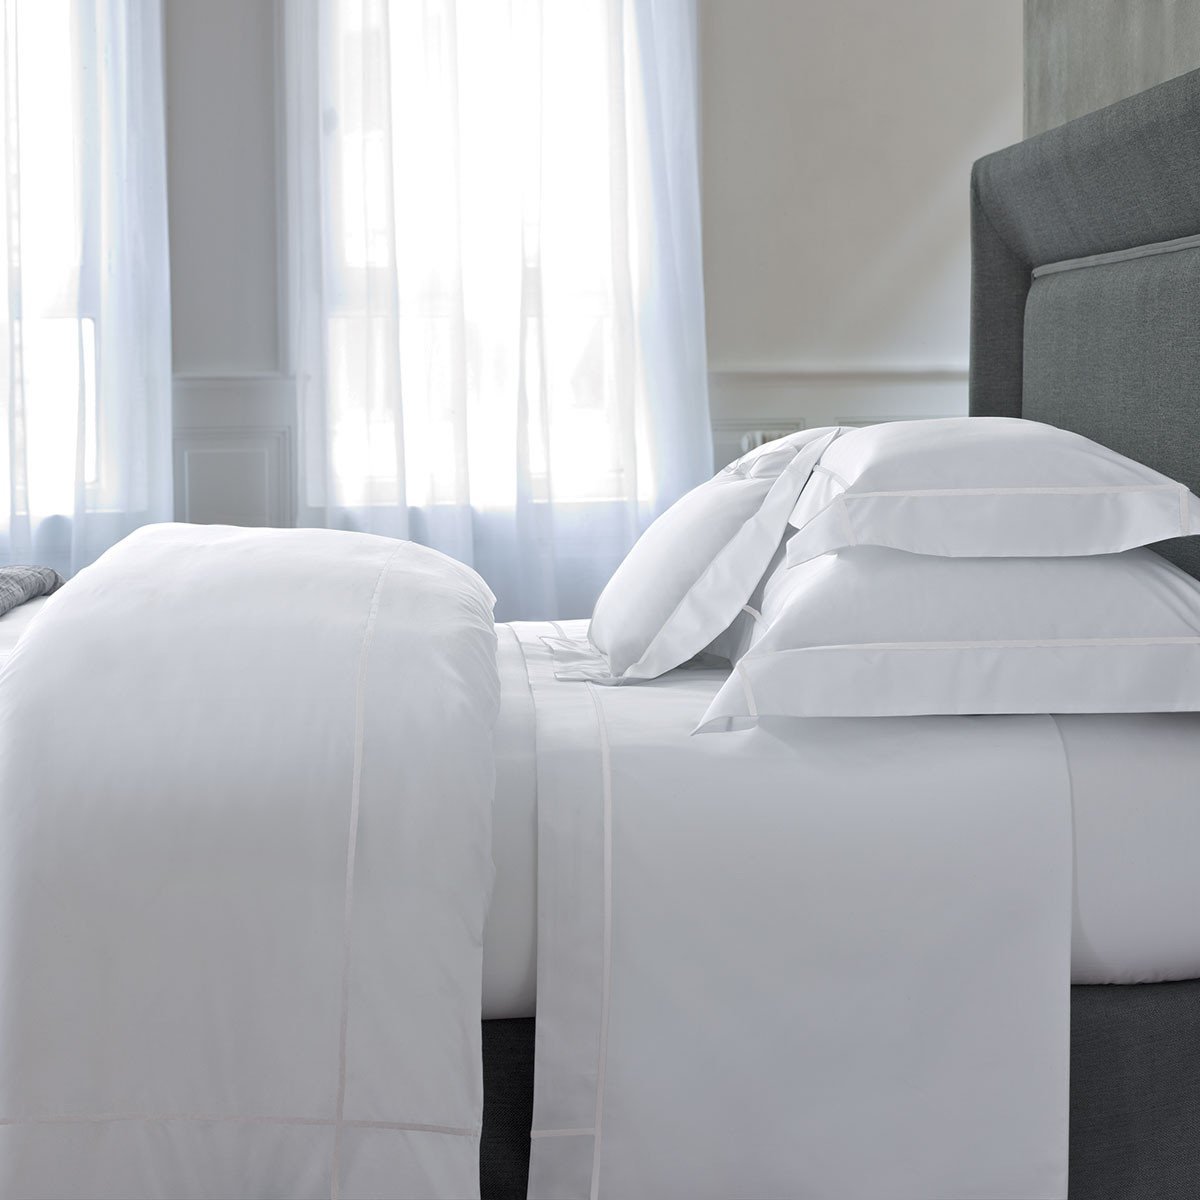 Athena Blanc Bedding Collection by Yves Delorme | Fig Linens - White sheets, duvet cover, sham